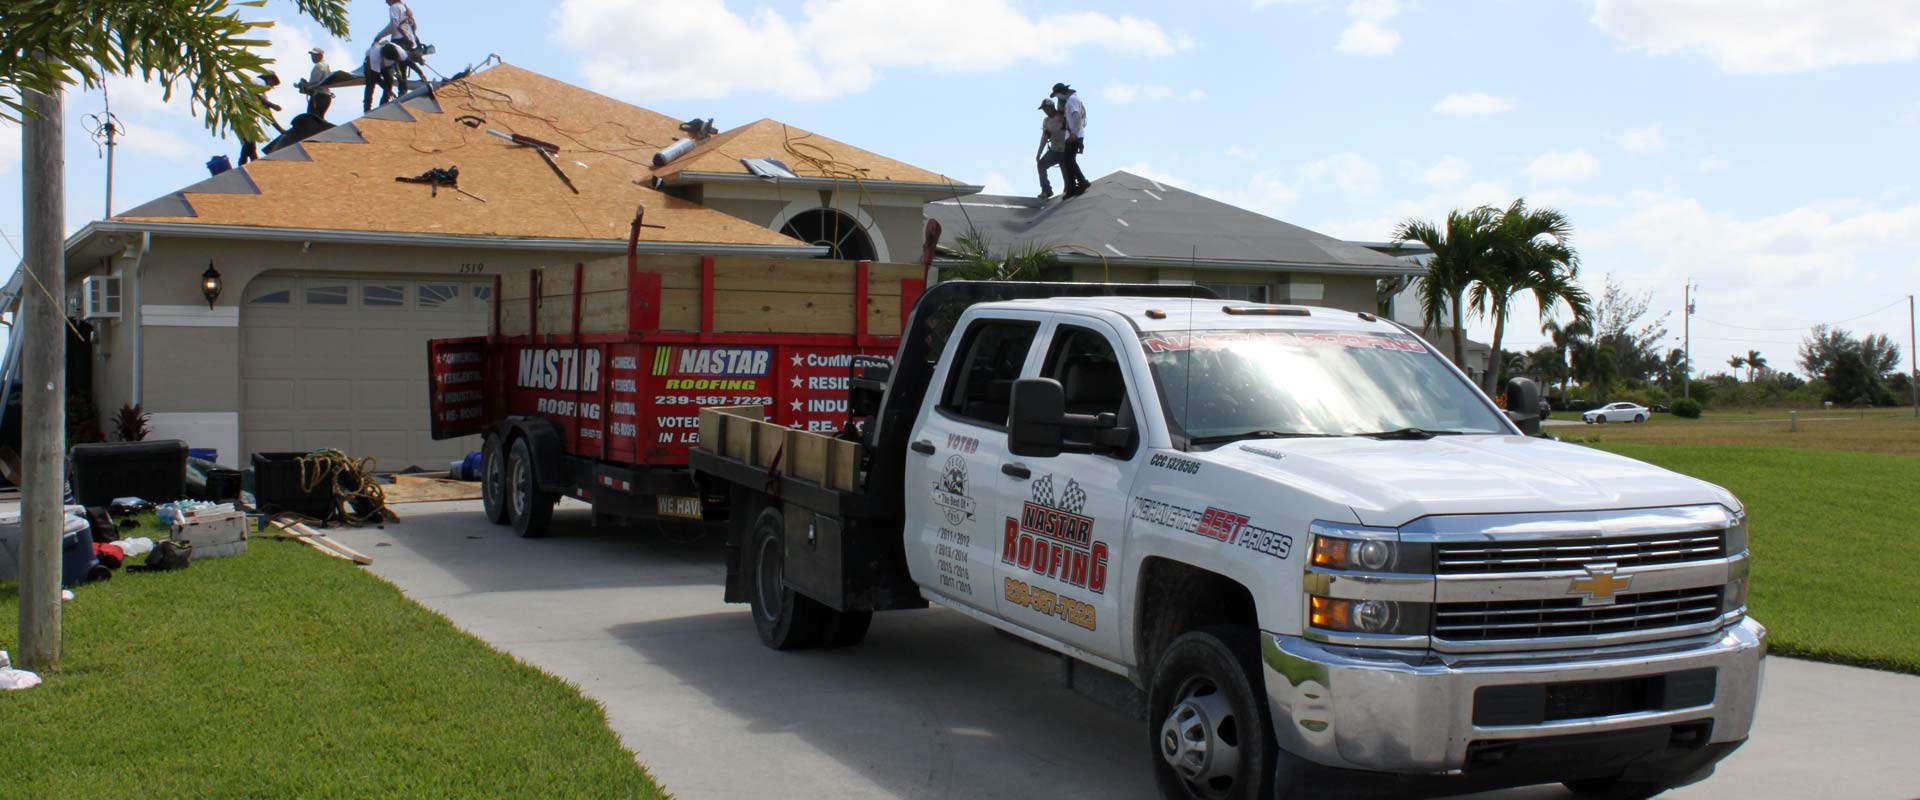 Nastar Roofing replaces your shingle roof with the latest energy saving shingles